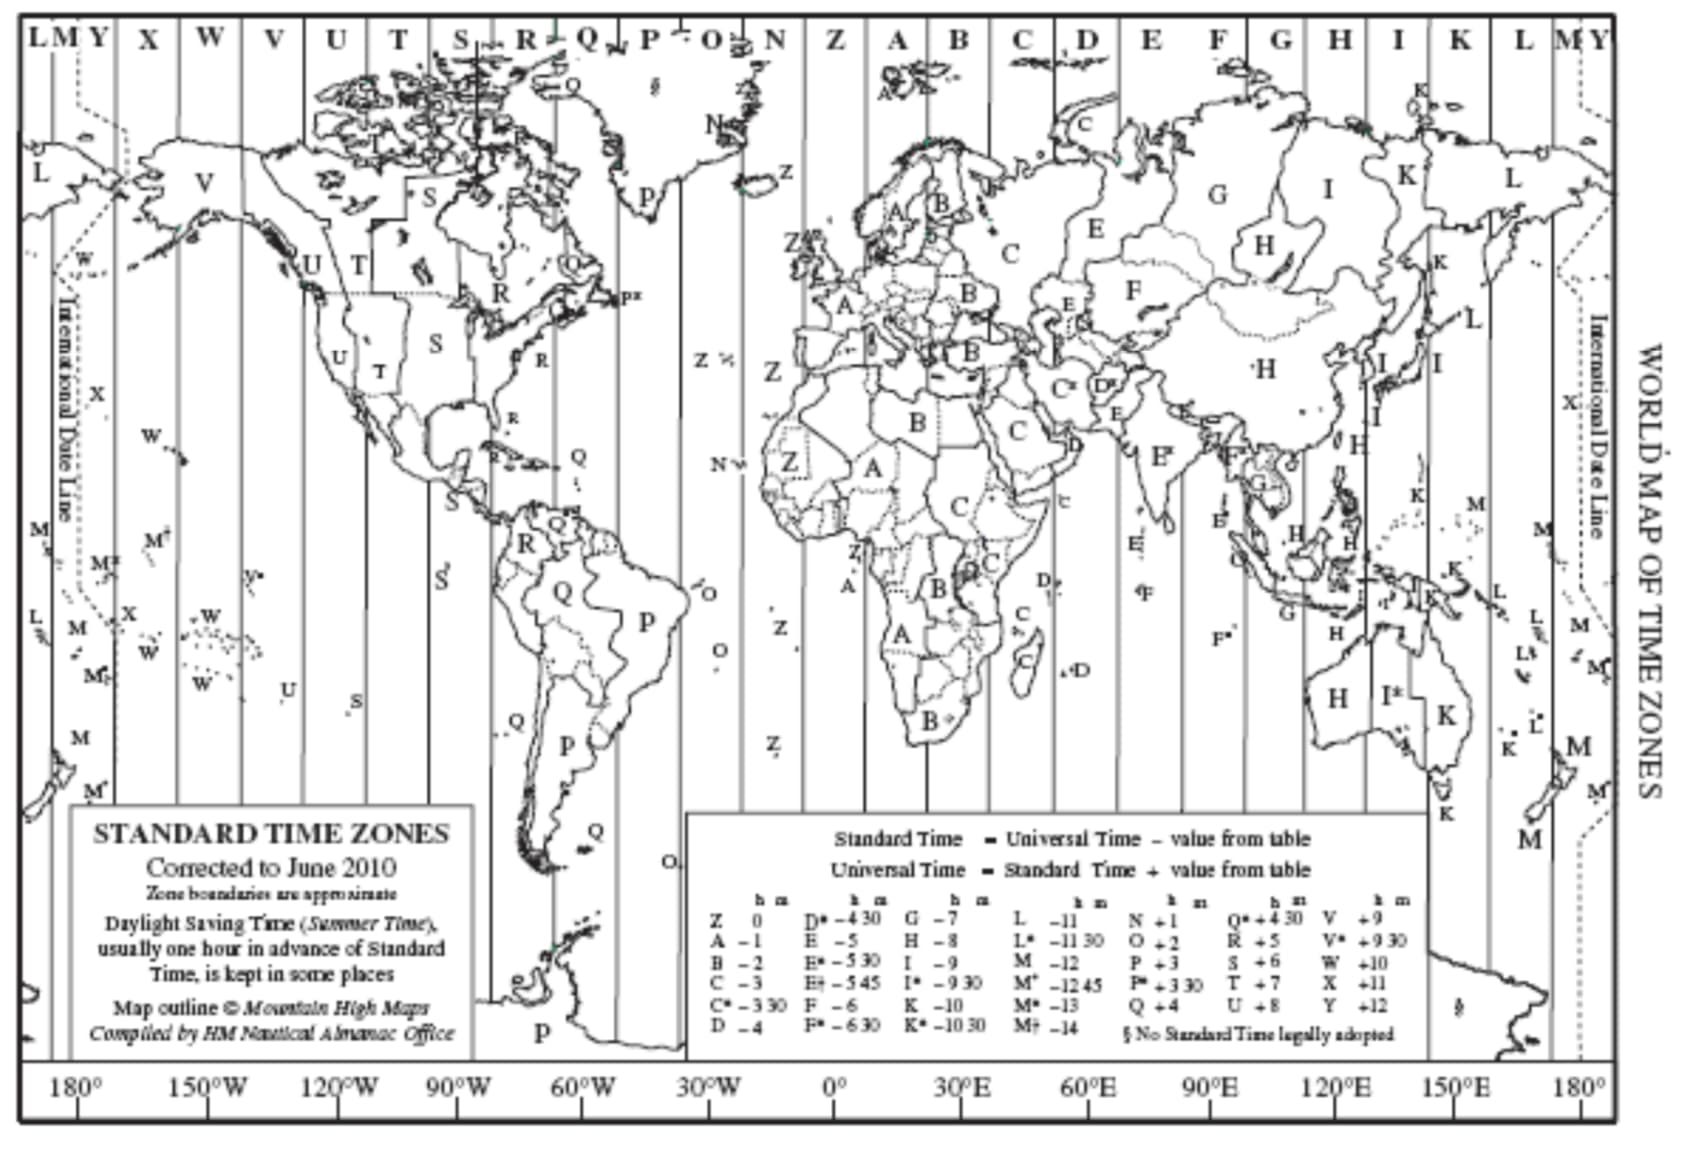 A map of military time zones from the ACP 121(I) standard